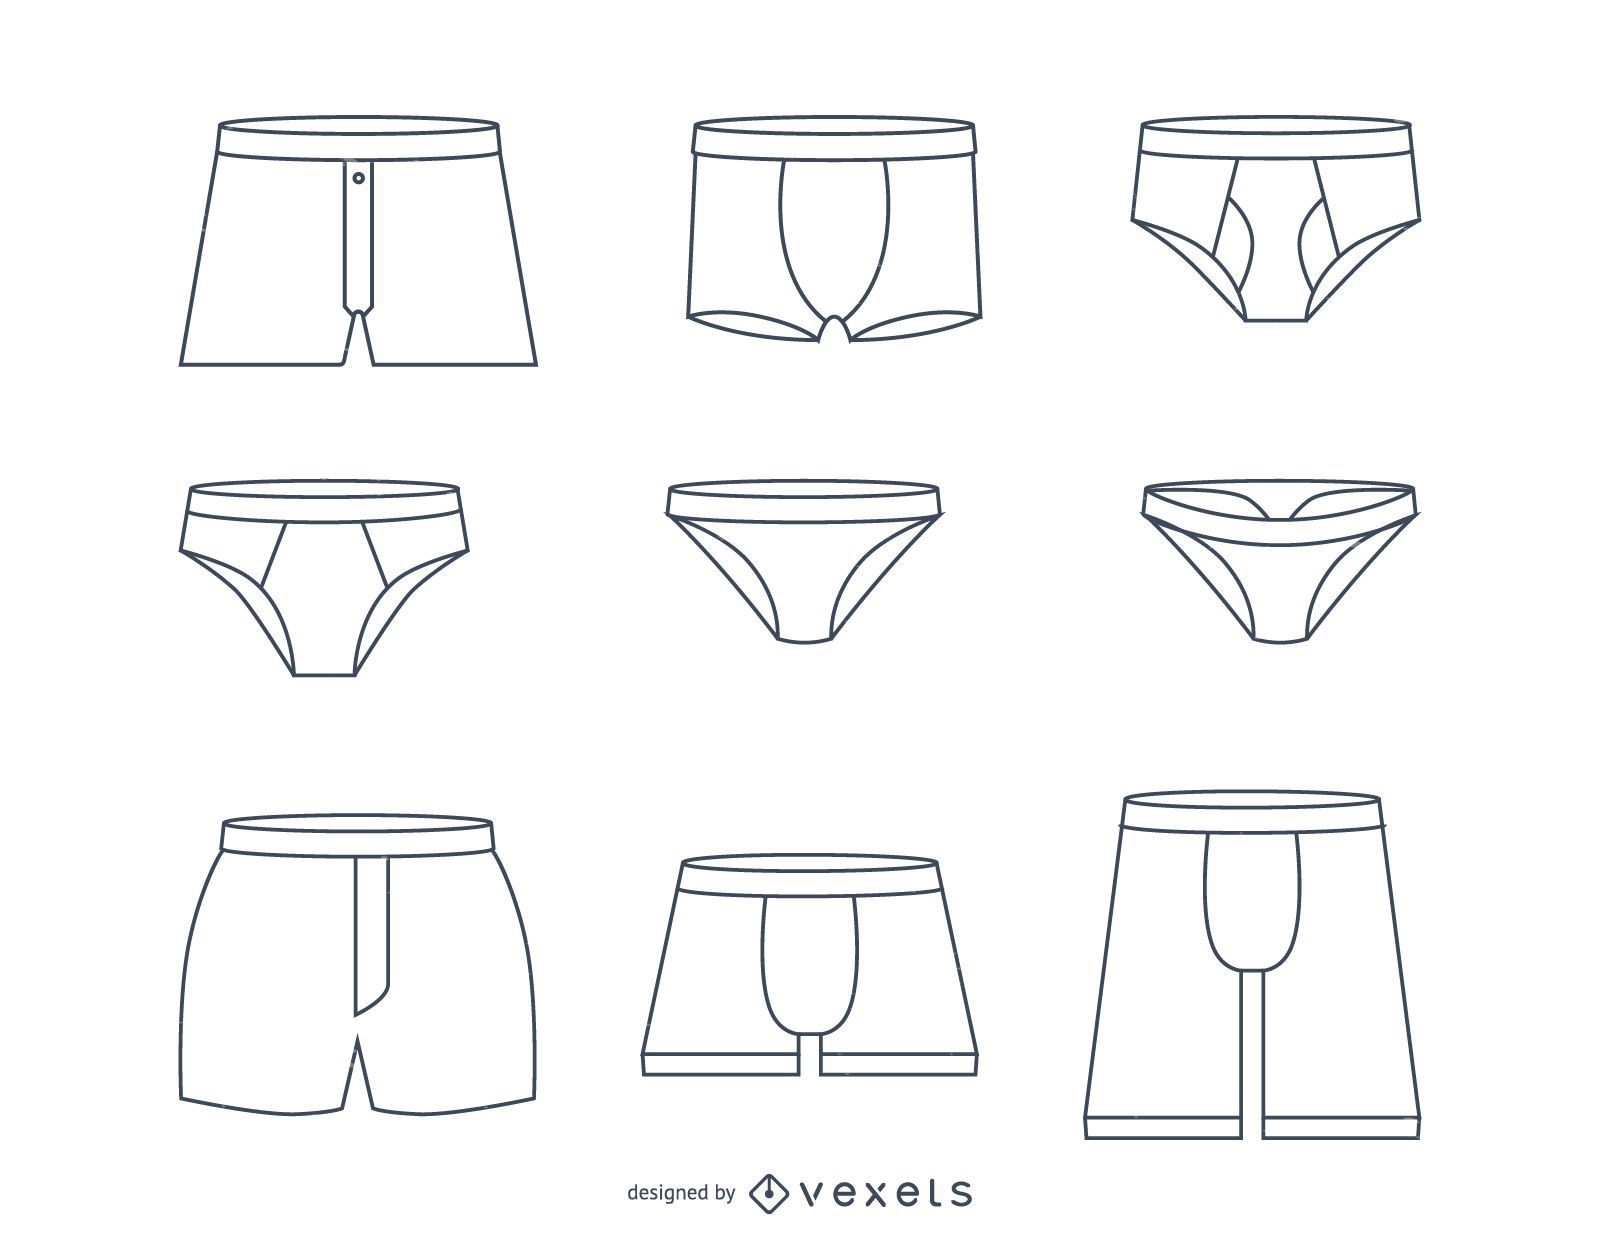 Lingerie Underwear Man-made Object Vectors from GraphicRiver